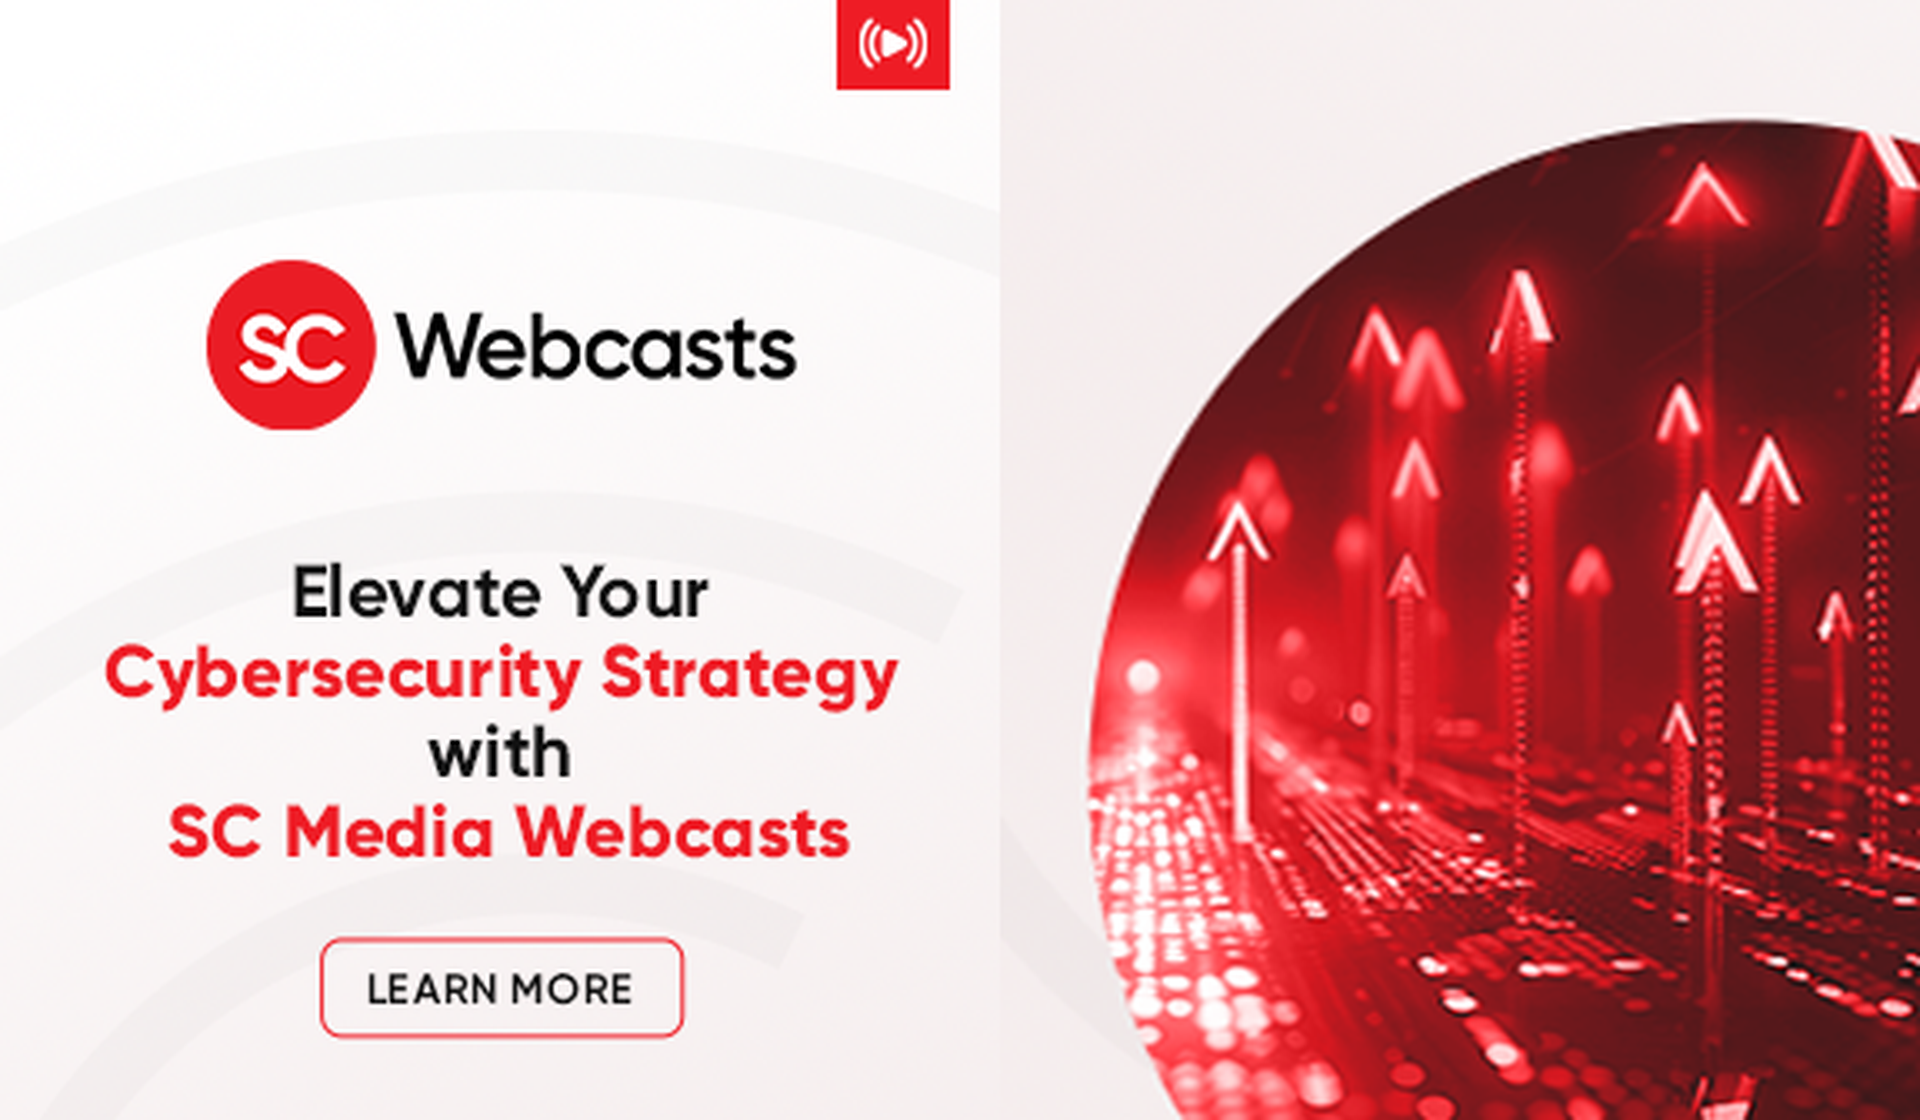 SC Media Webcasts: Secure Your Future Here